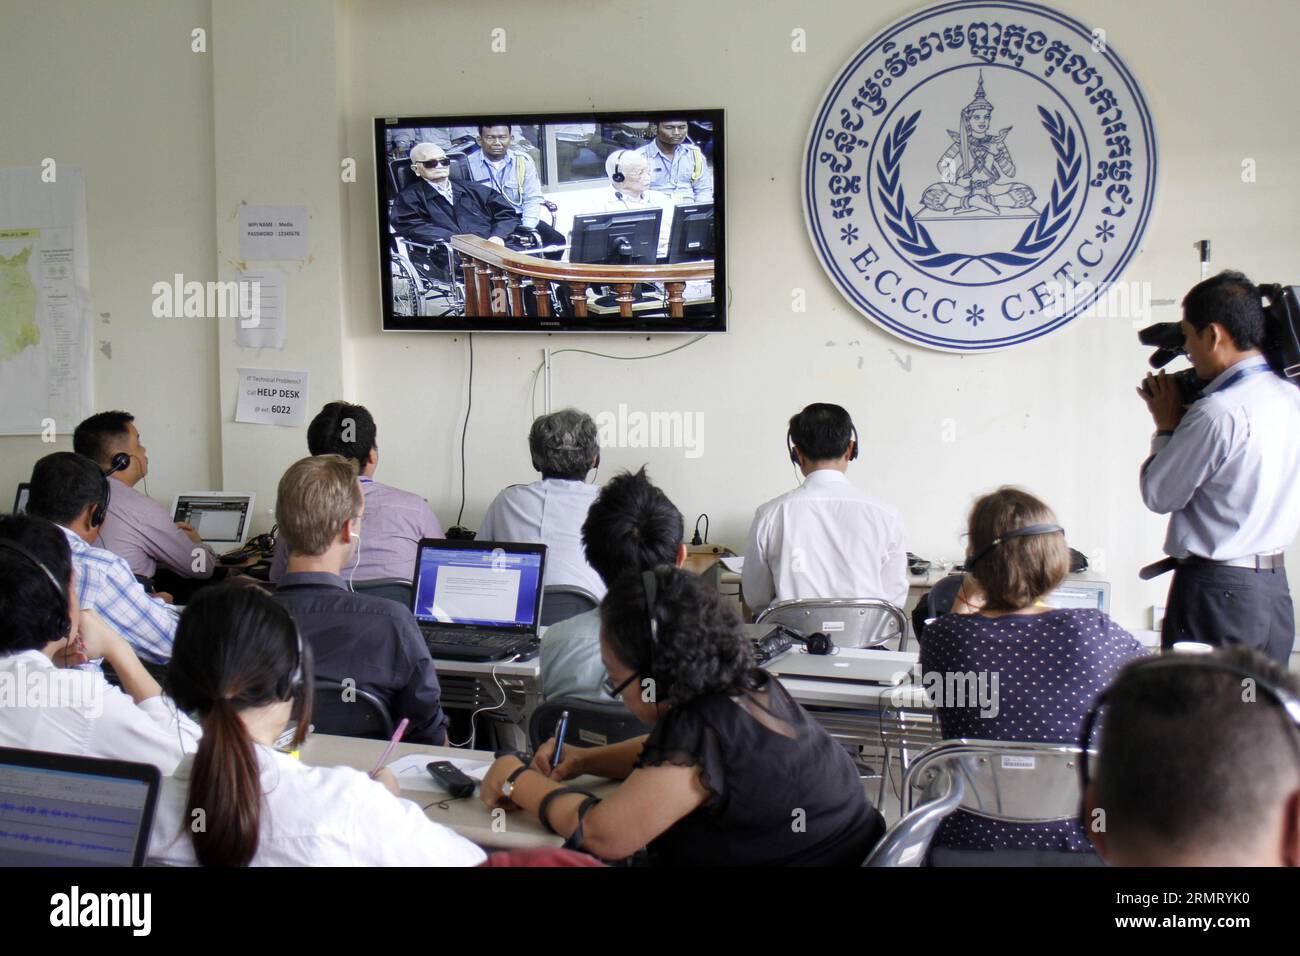 (140807) -- PHNOM PENH, Aug. 7, 2014 -- Media members watch the pronouncement of judgment against two aging former top leaders of the Democratic Kampuchea in Phnom Penh, Cambodia, Aug. 7, 2014. The United Nations war crimes tribunal convicted two aging former top leaders of the Democratic Kampuchea, also known as Khmer Rouge, of atrocity crimes against humanity and sentenced them to life in prison, according to a verdict pronounced by the tribunal s president Nil Nonn on Thursday. ) CAMBODIA-PHNOM PENH-VERDICT Sovannara PUBLICATIONxNOTxINxCHN   Phnom Penh Aug 7 2014 Media Members Watch The pro Stock Photo